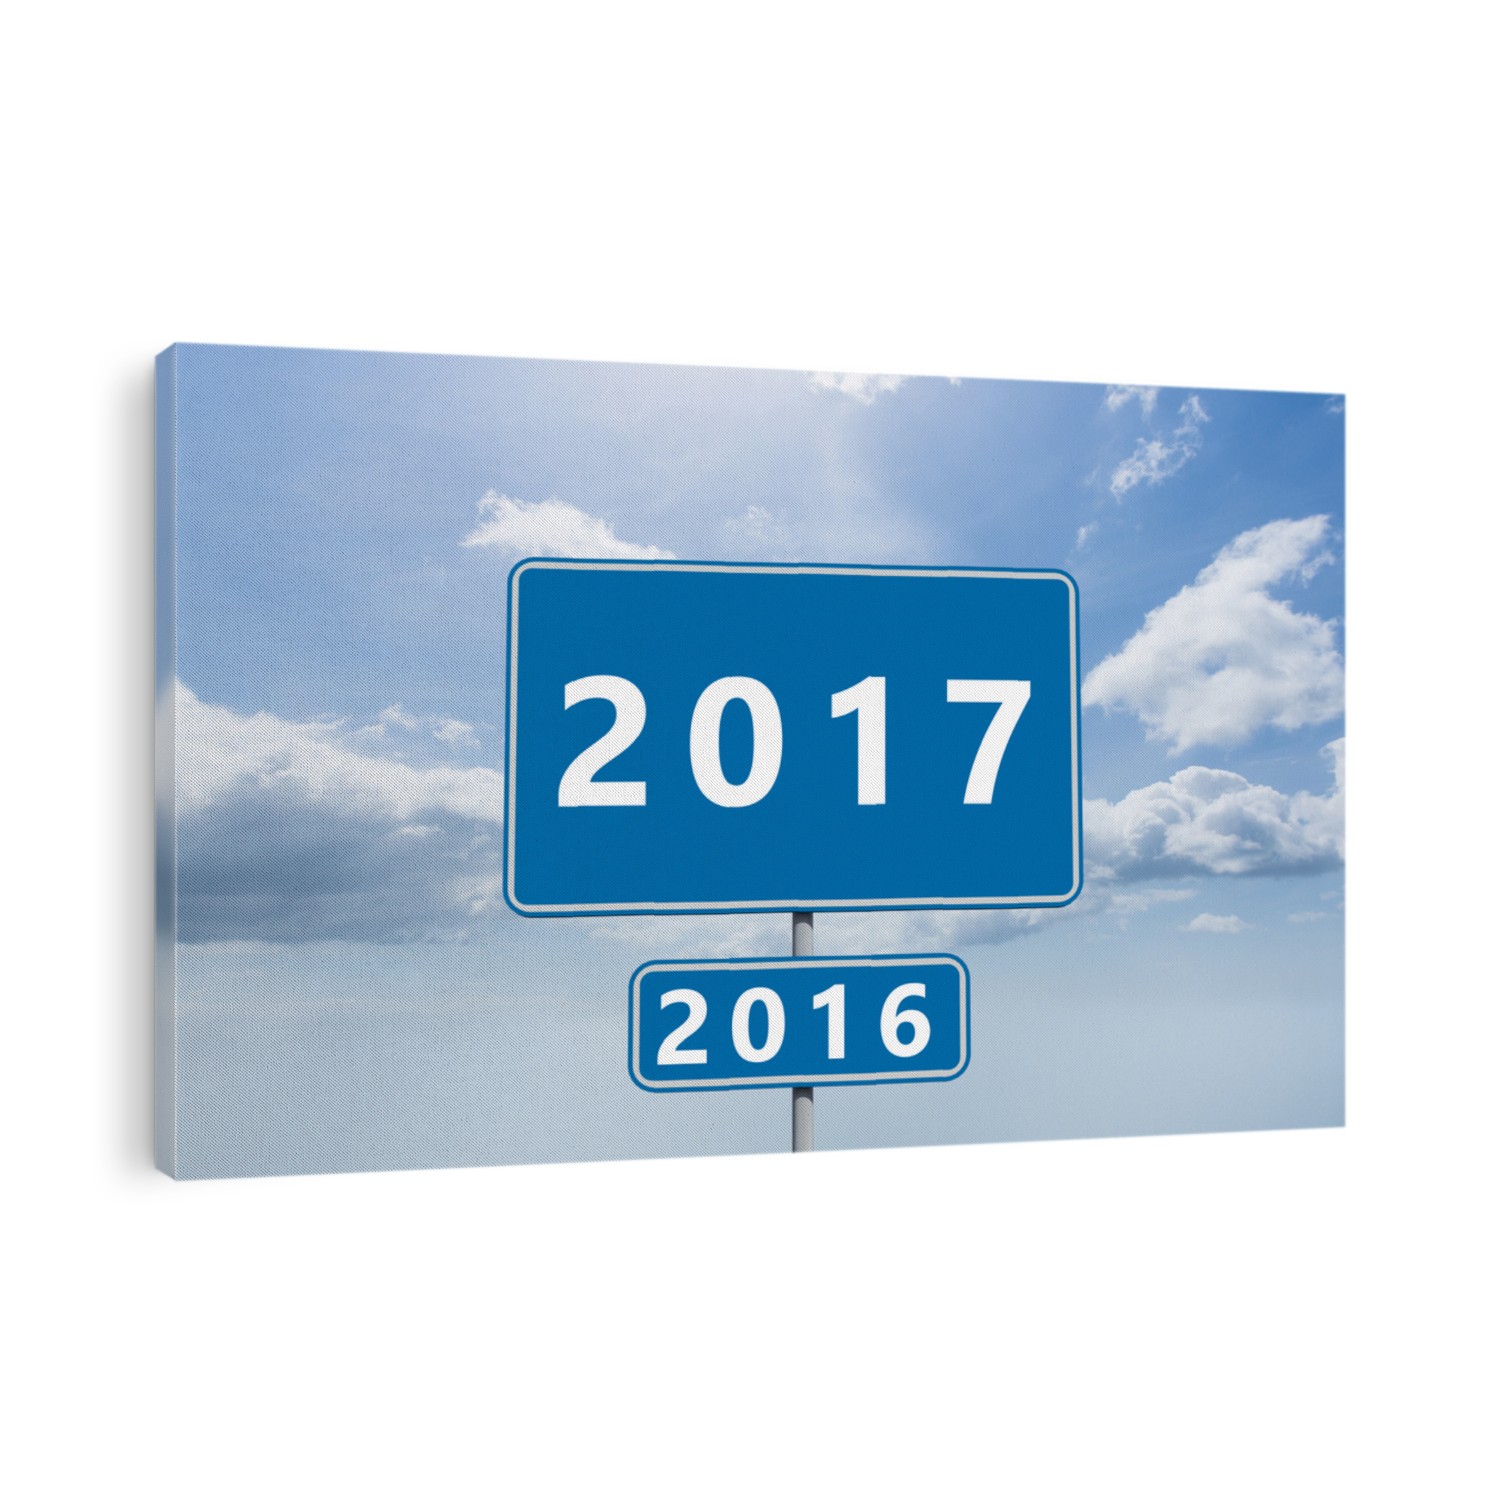 Digital image of new year 2017 against blue sky